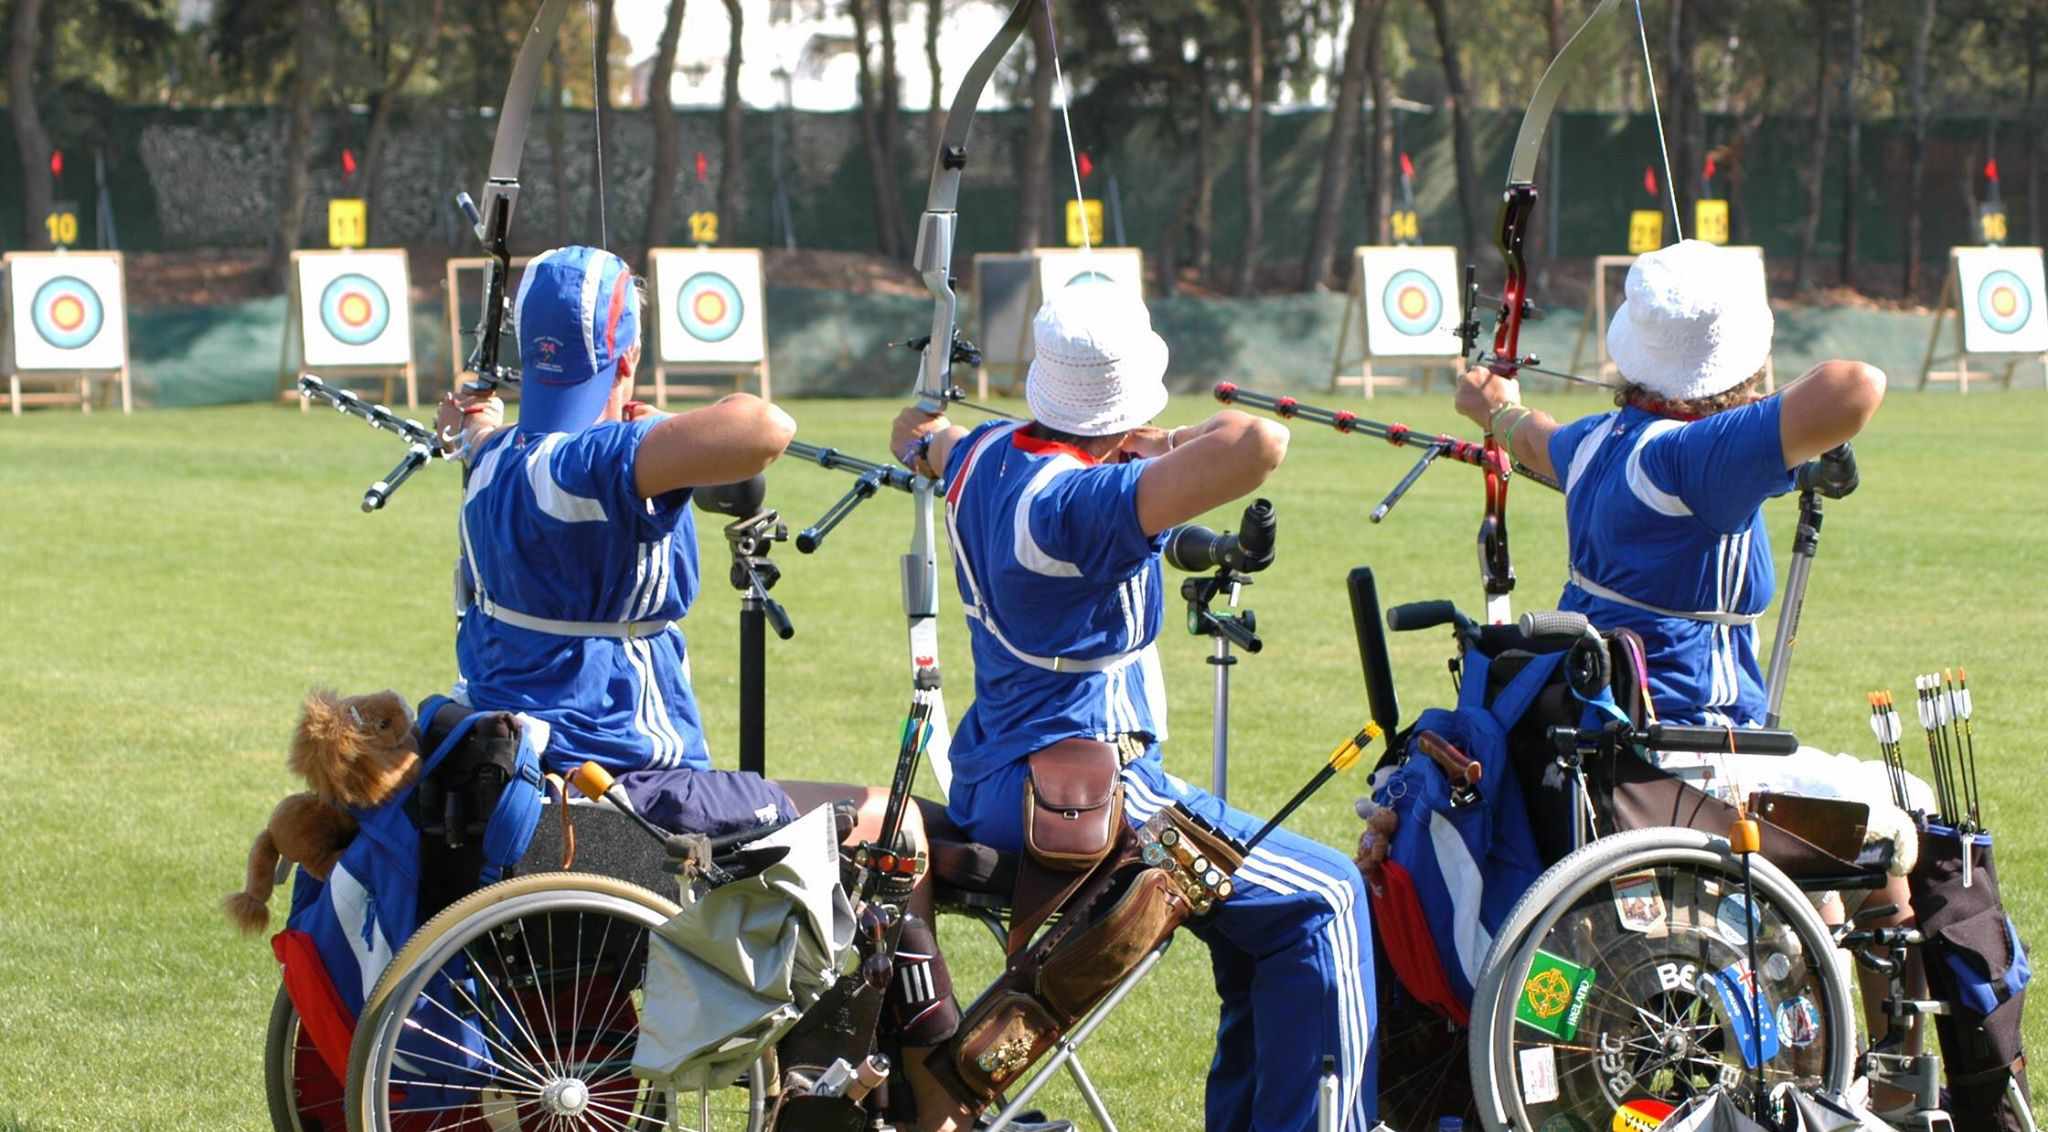 Archery team of Akrounta’s youth centre in Limassol